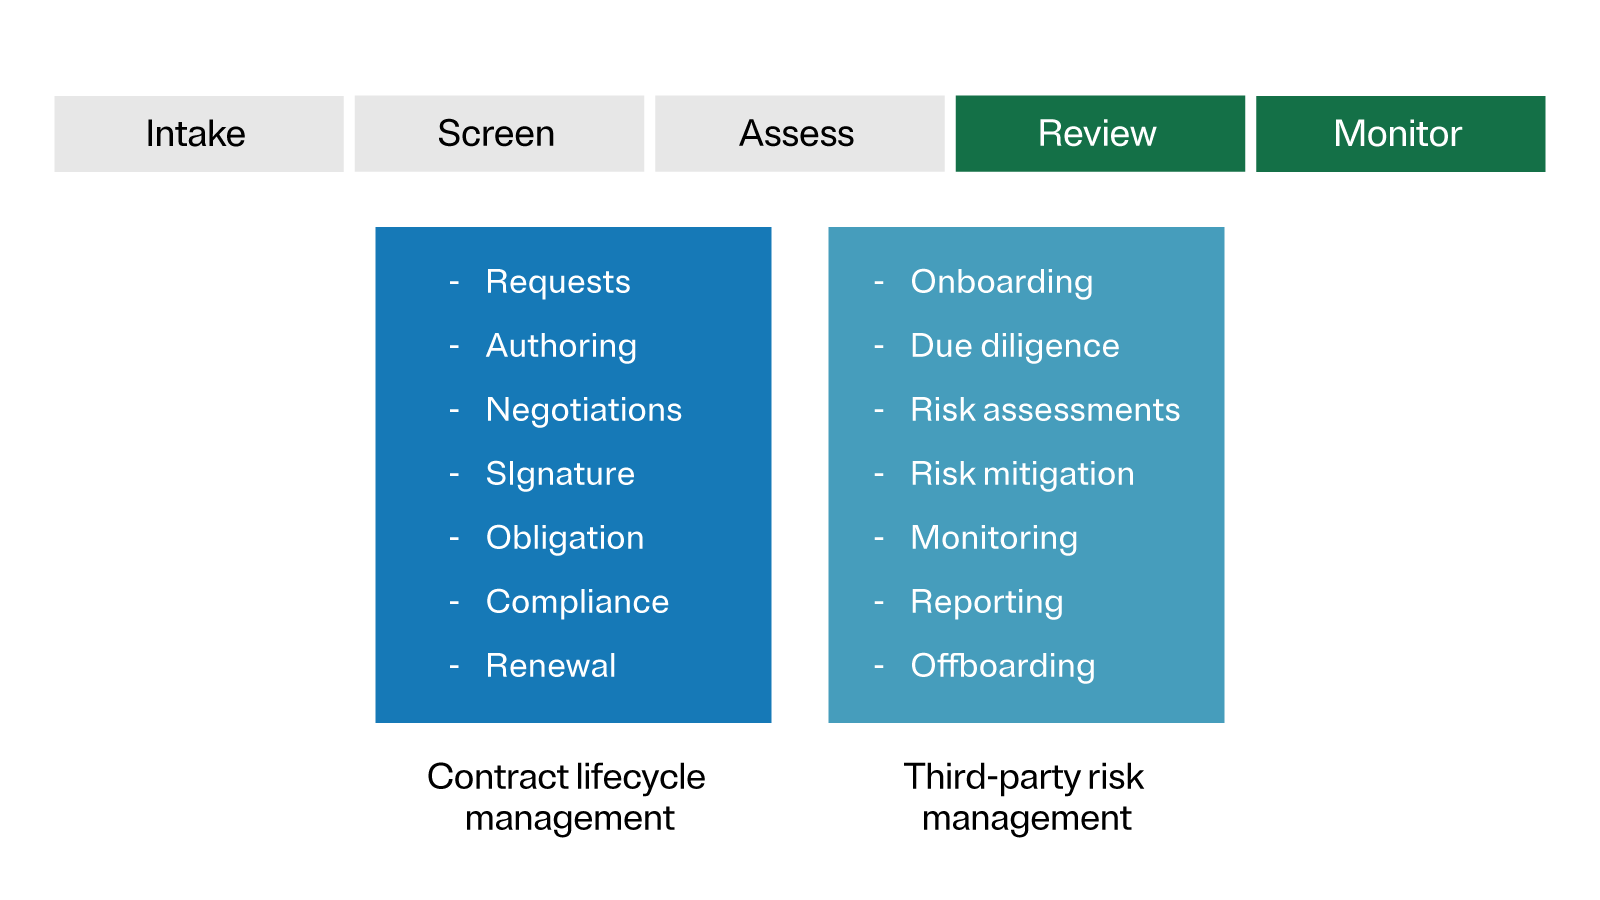 Graphic of two lists showing the steps included in contract lifecycle management and third-party risk management.